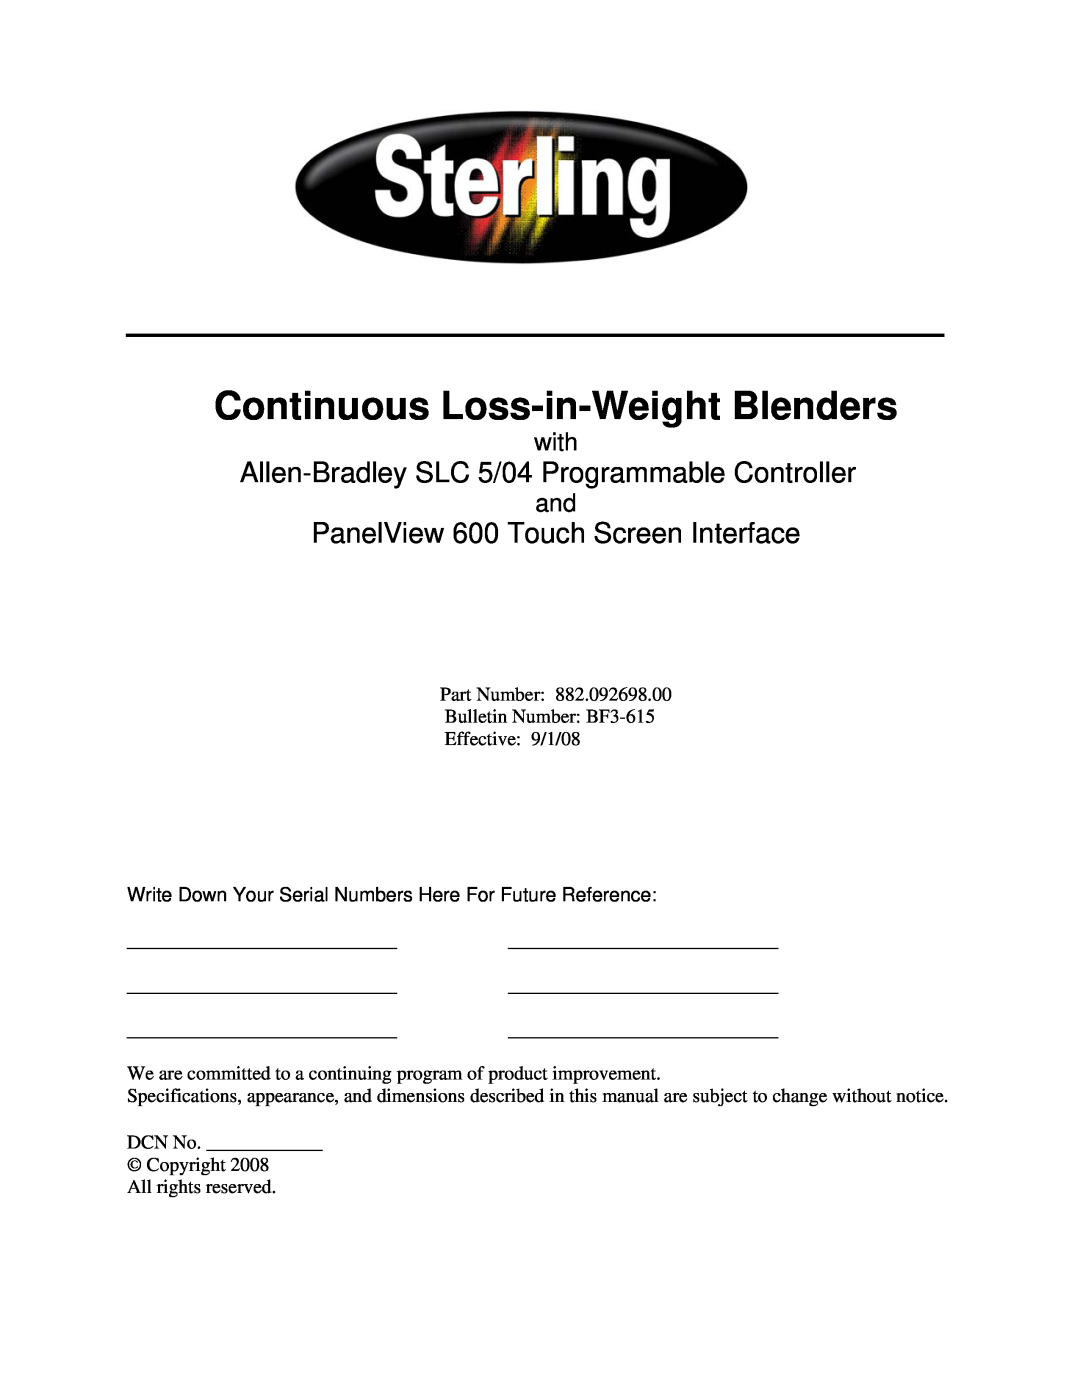 Sterling 600, 100, 015, SLC 5/04 specifications ________________________________, Continuous Loss-in-WeightBlenders, with 